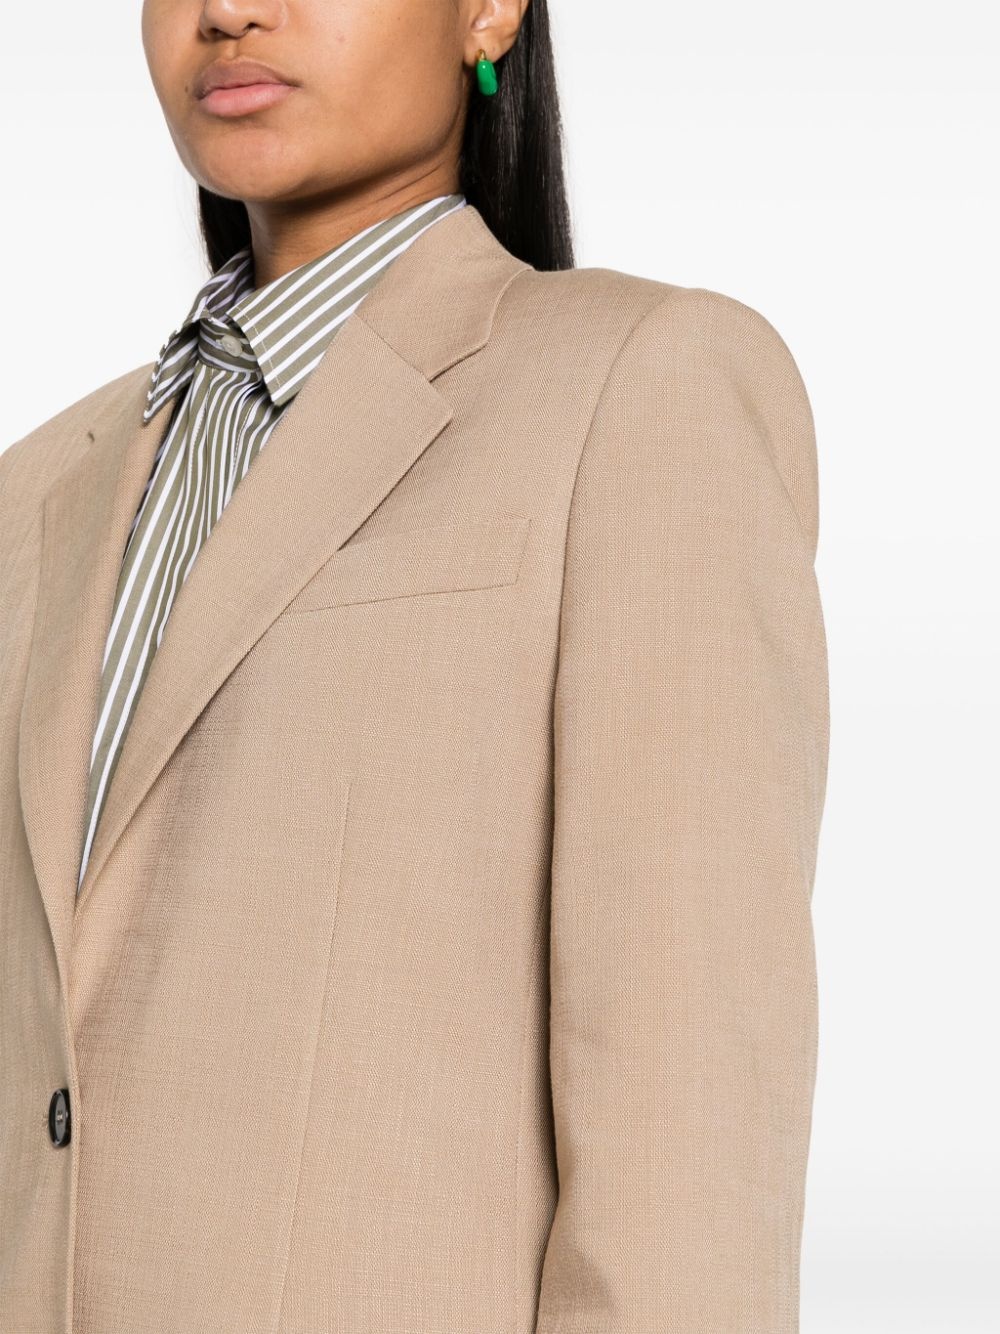 notched-lapels single-breasted blazer - 5